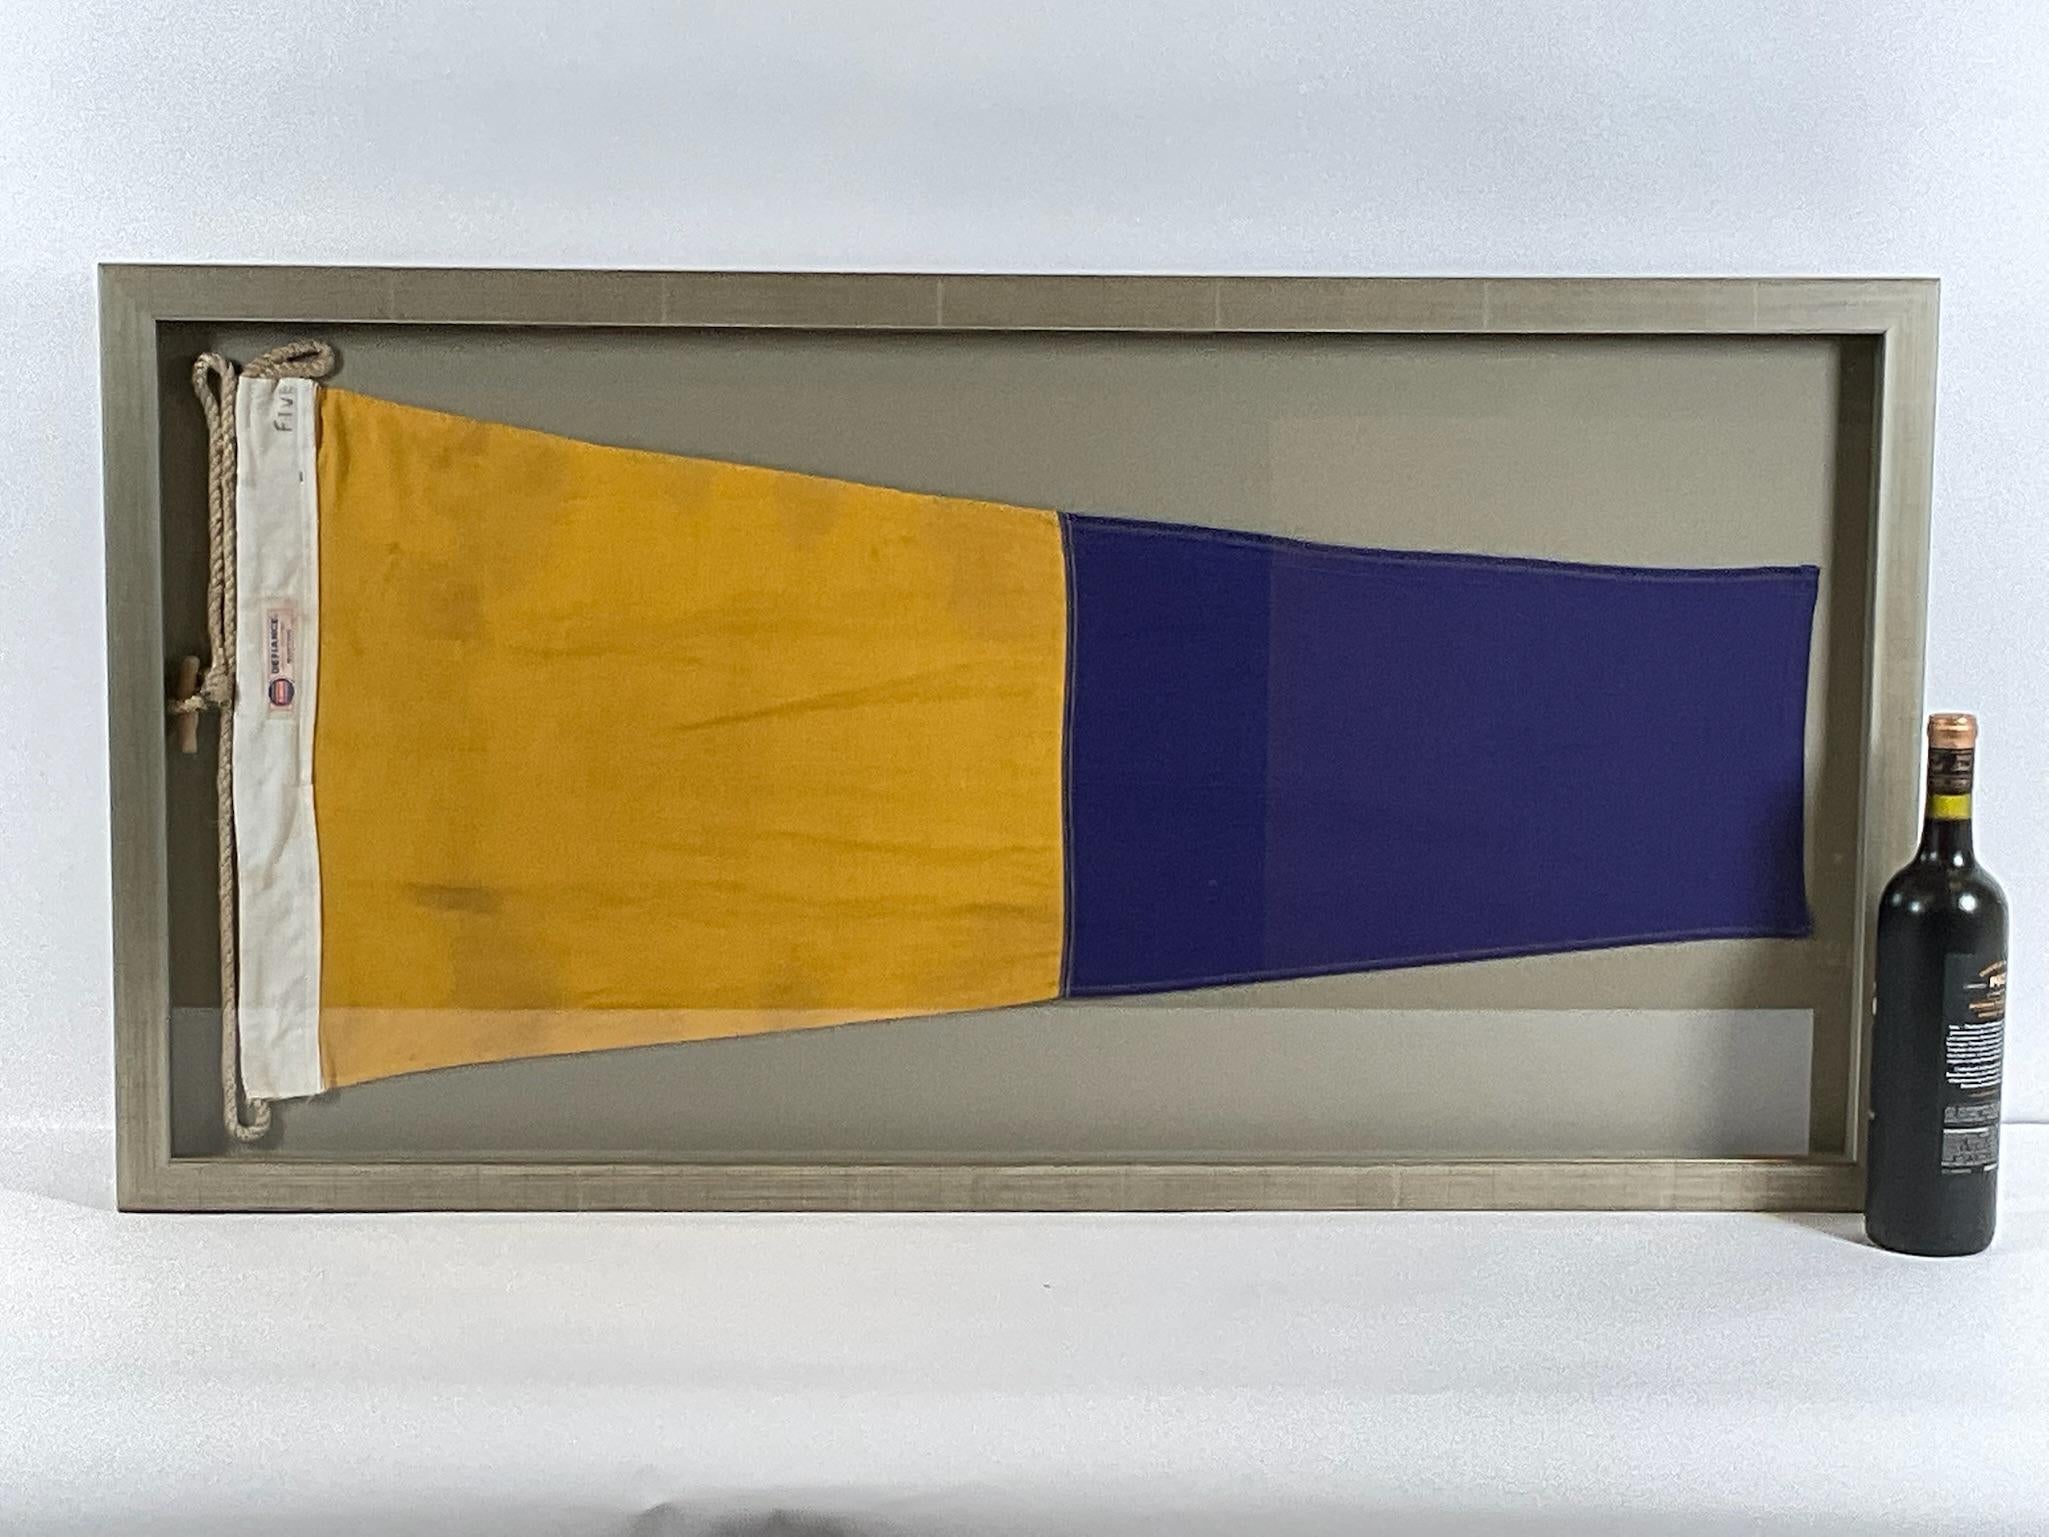 Large linen nautical signal flag representing numeral FIVE. Stitched in panels of blue and yellow. White canvas hoist with manila rope and wood toggle. Big dimensions. Circa 1955.

Weight: 13 lbs.
Overall Dimensions: 22